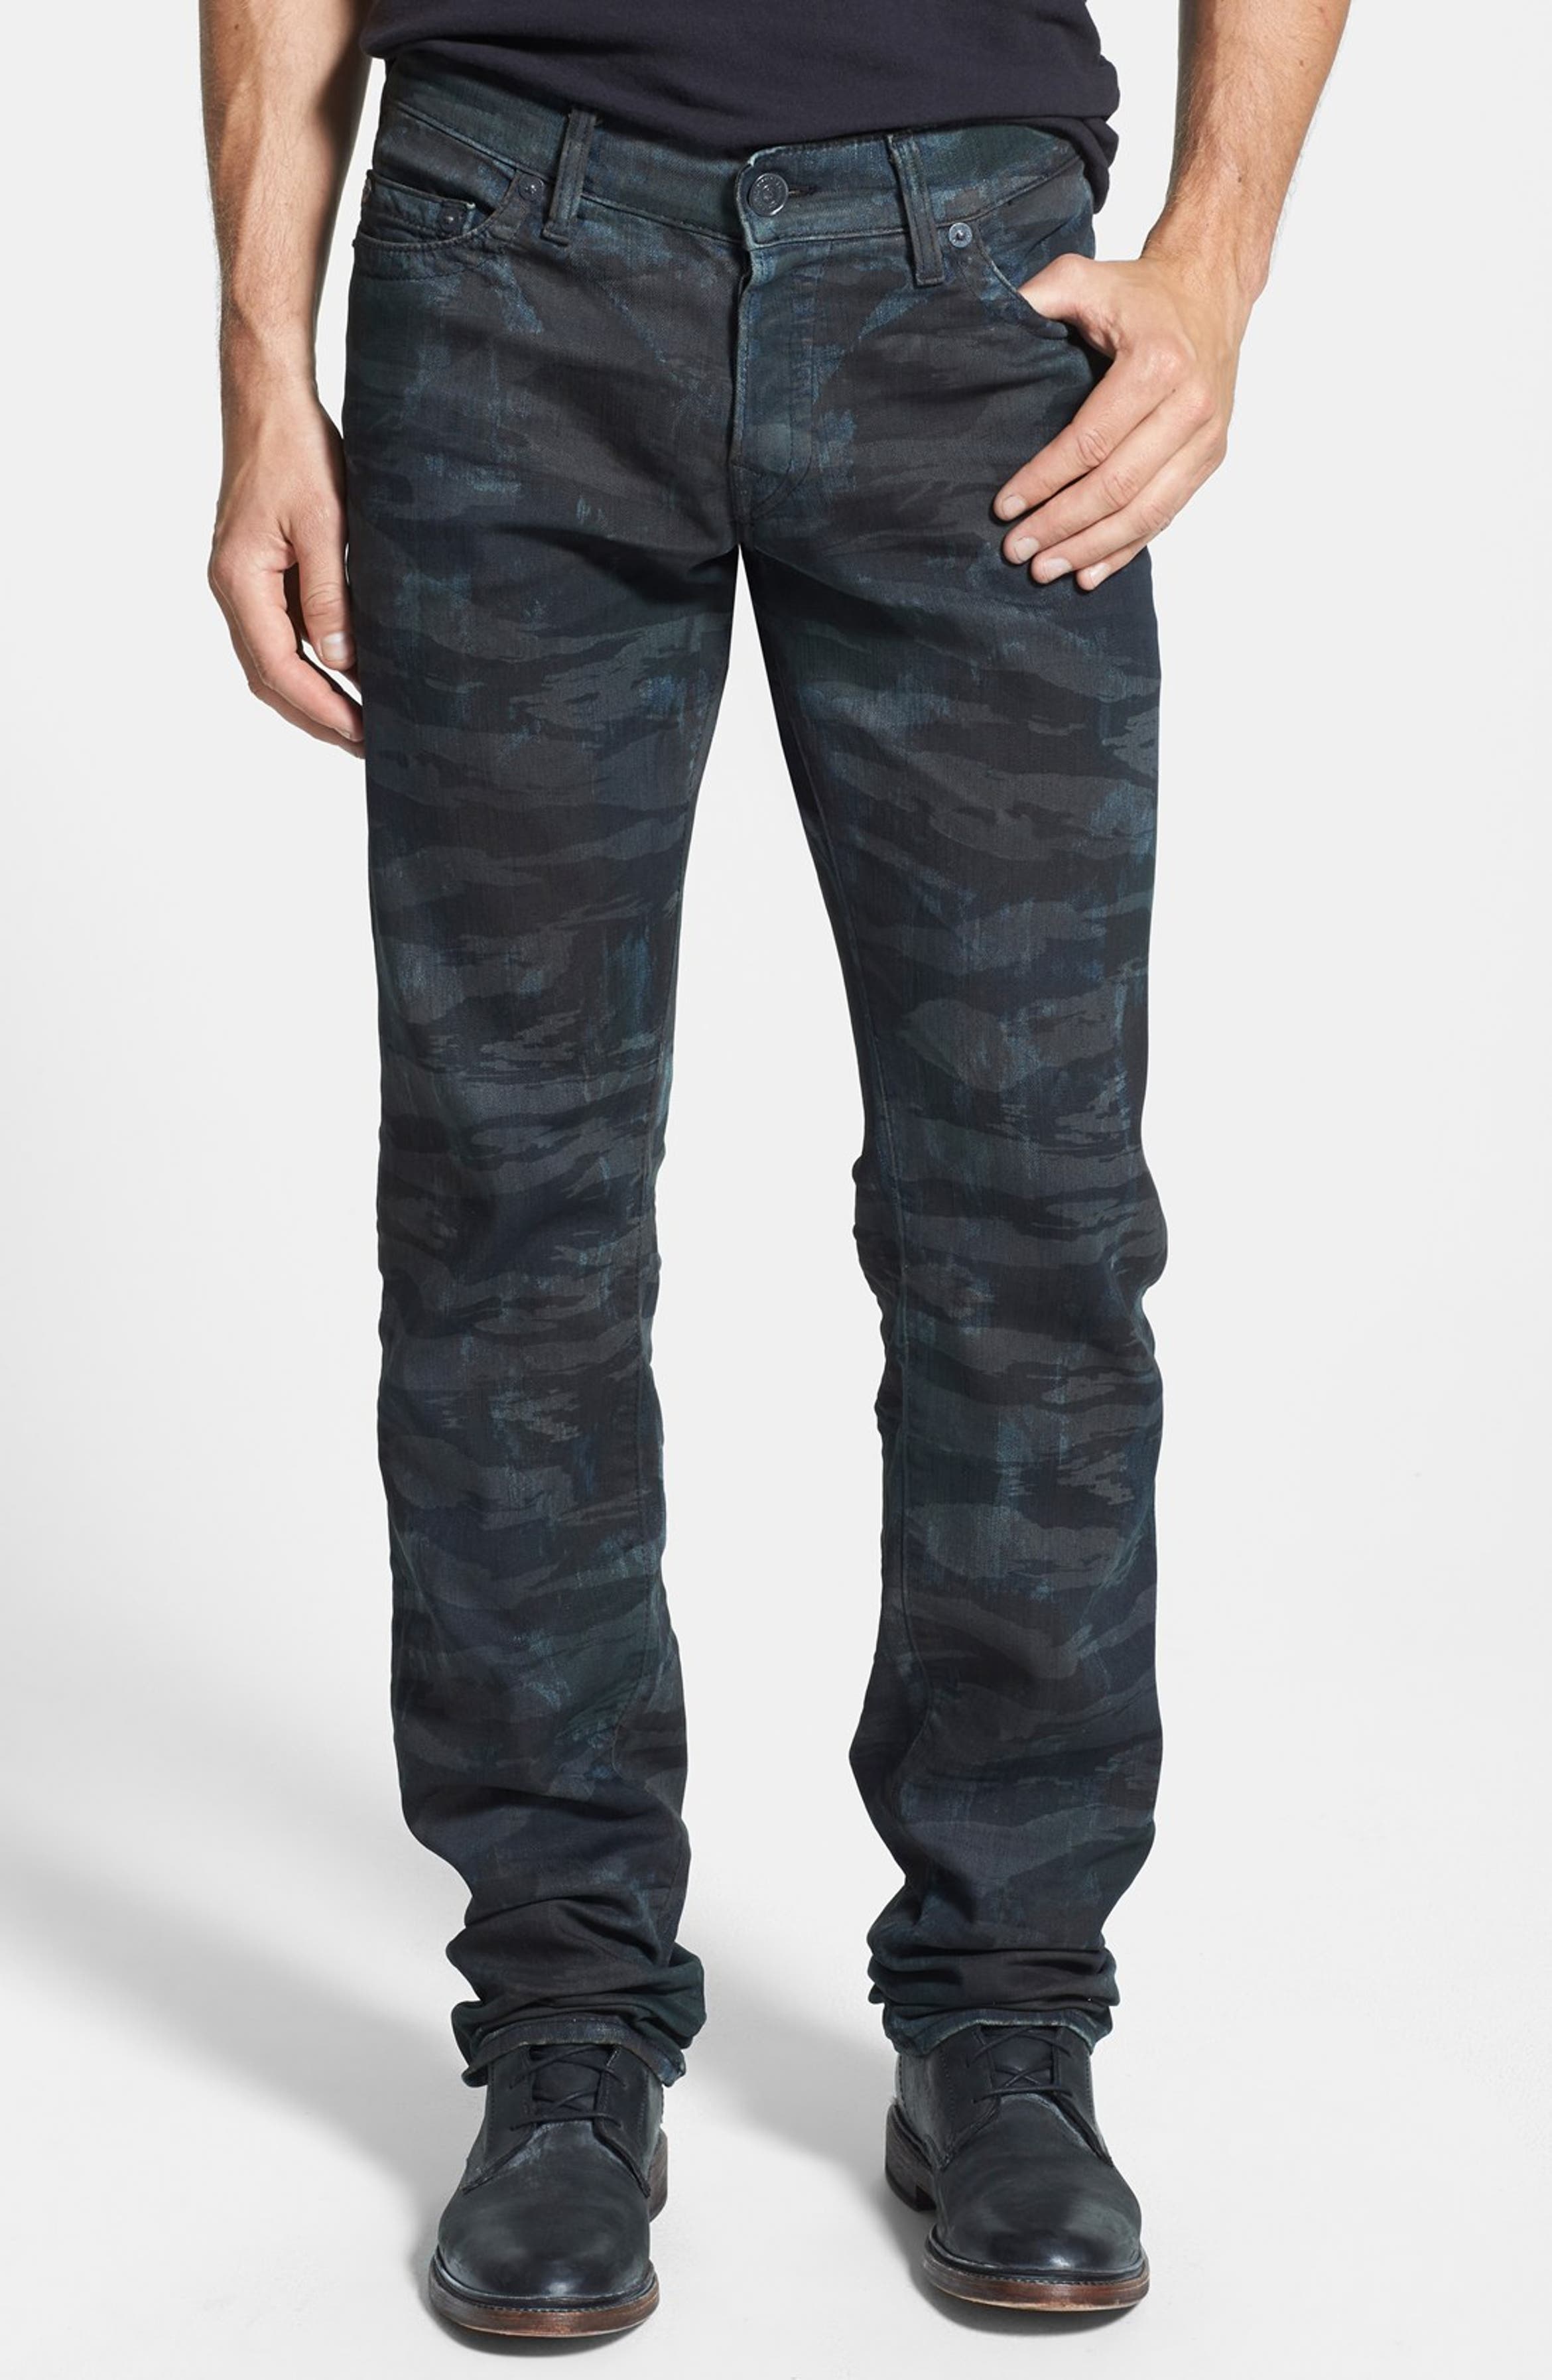 True Religion Brand Jeans 'Geno' Camo Relaxed Slim Fit Jeans (Tiger ...